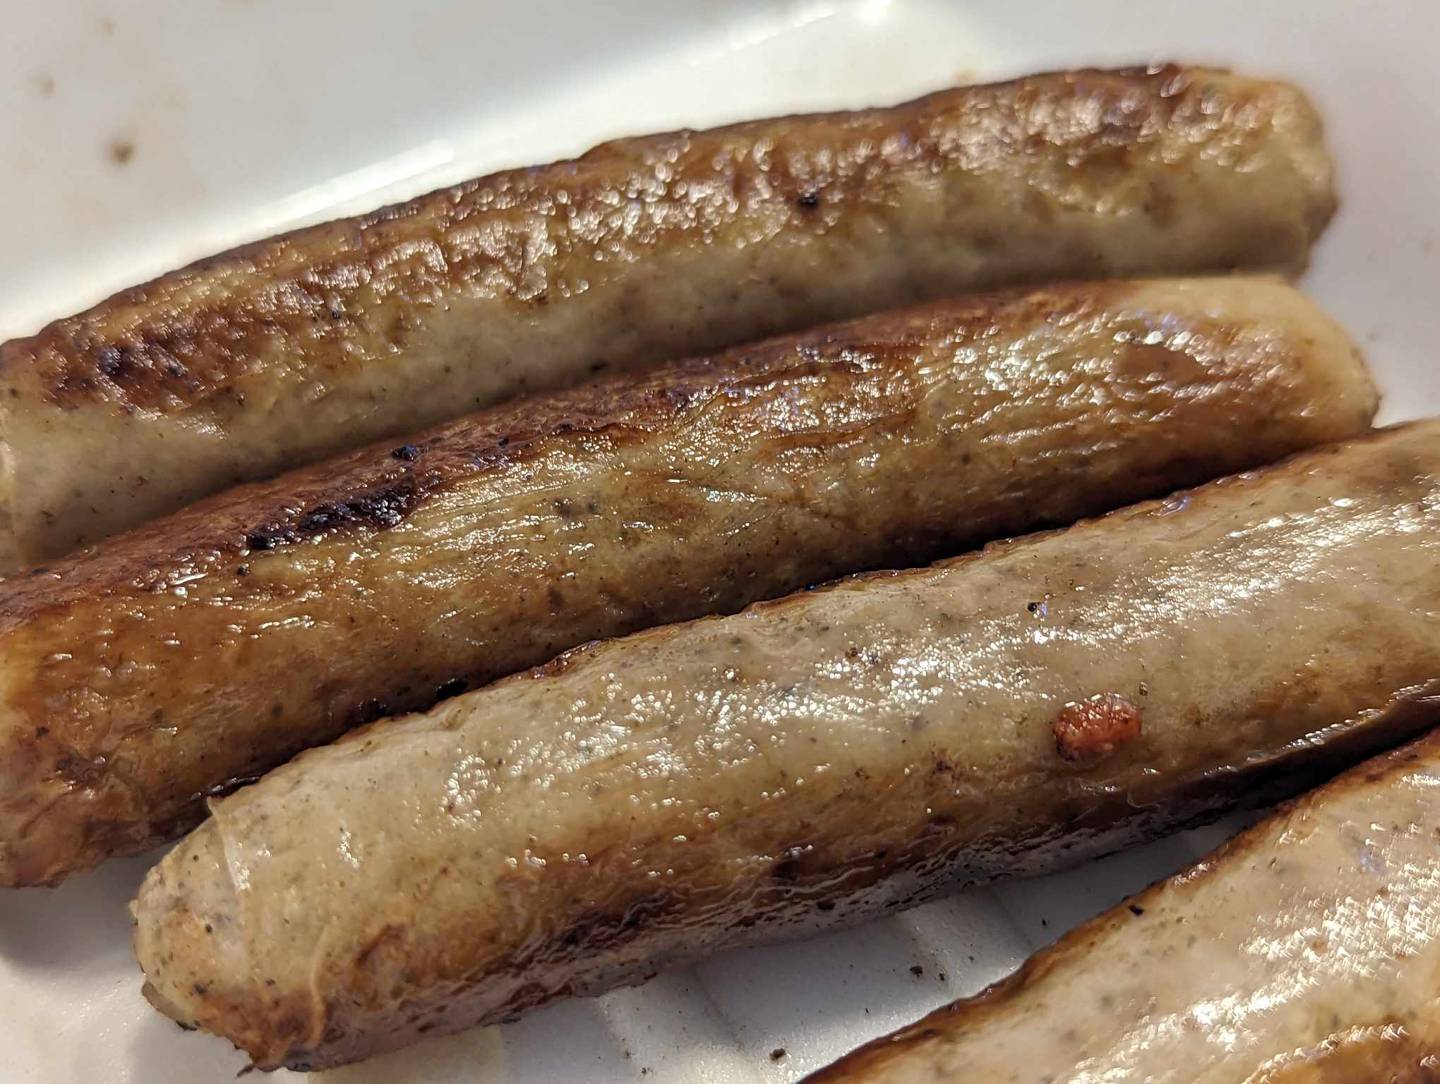 Pictured is a side order of sausage links as served at the Southern Cafe in Crest Hill.